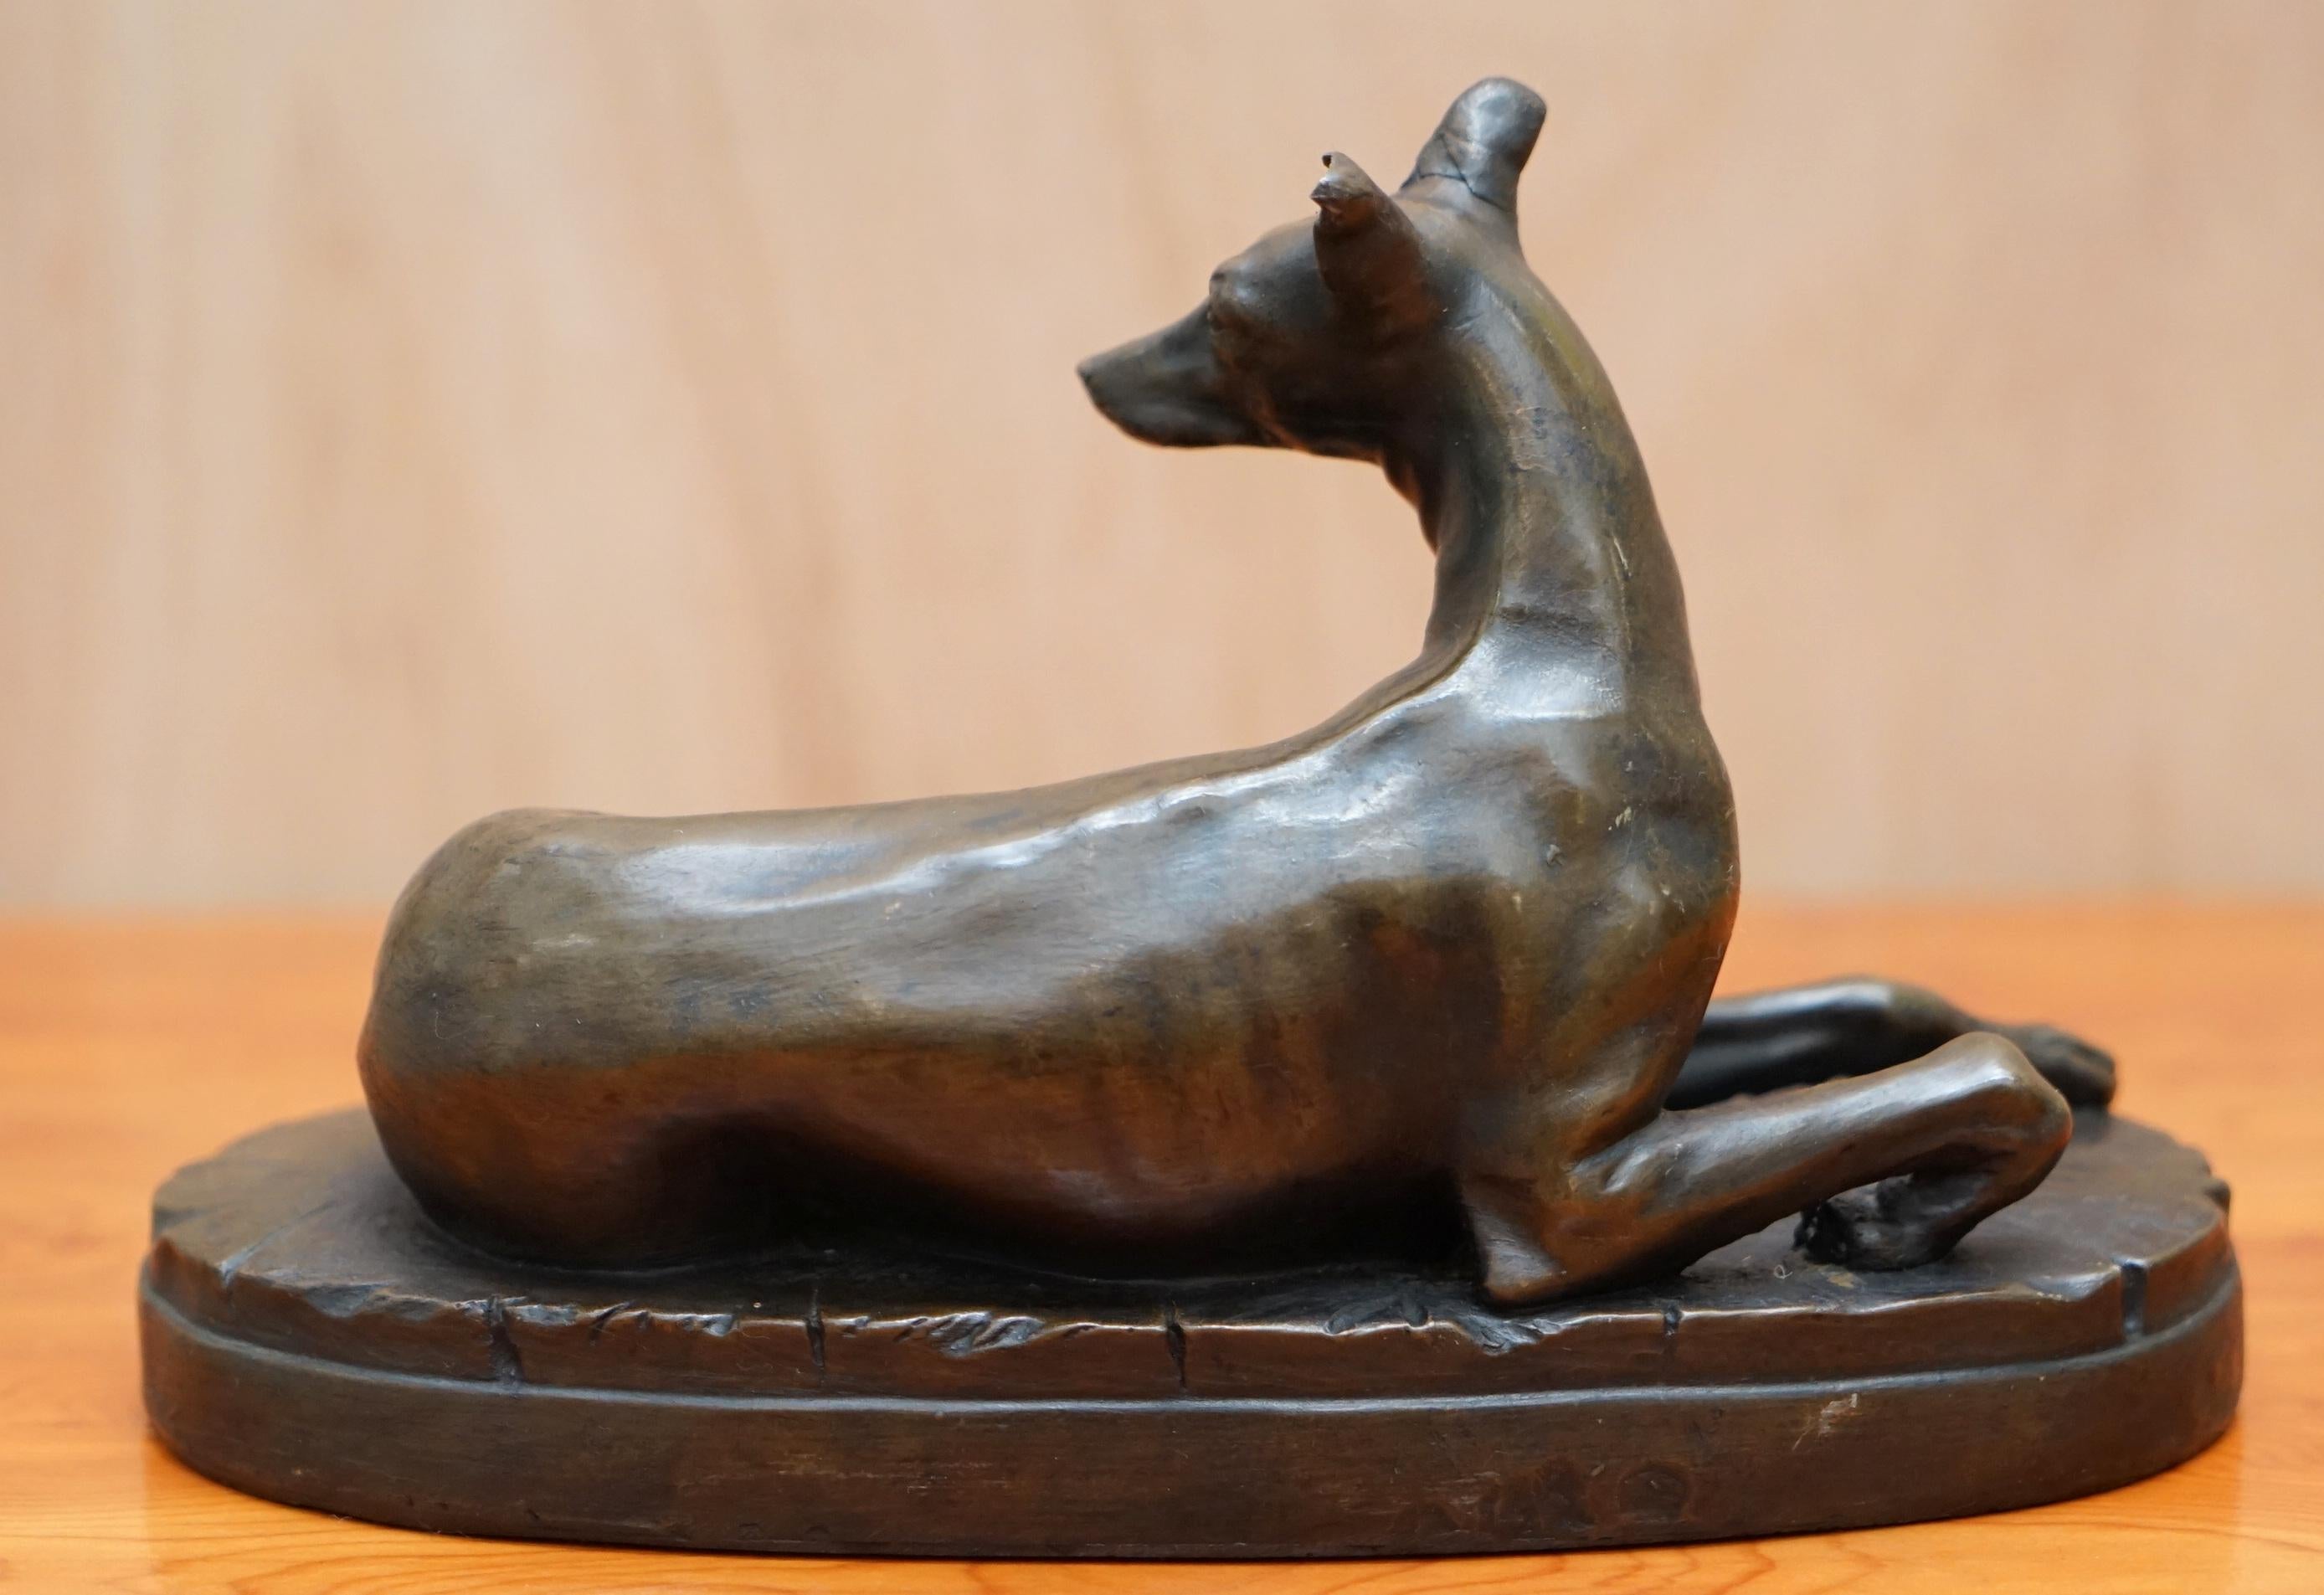 Lovely Bronze Statue of a Whippet Dog Laying Down with a Expecting Expression 1